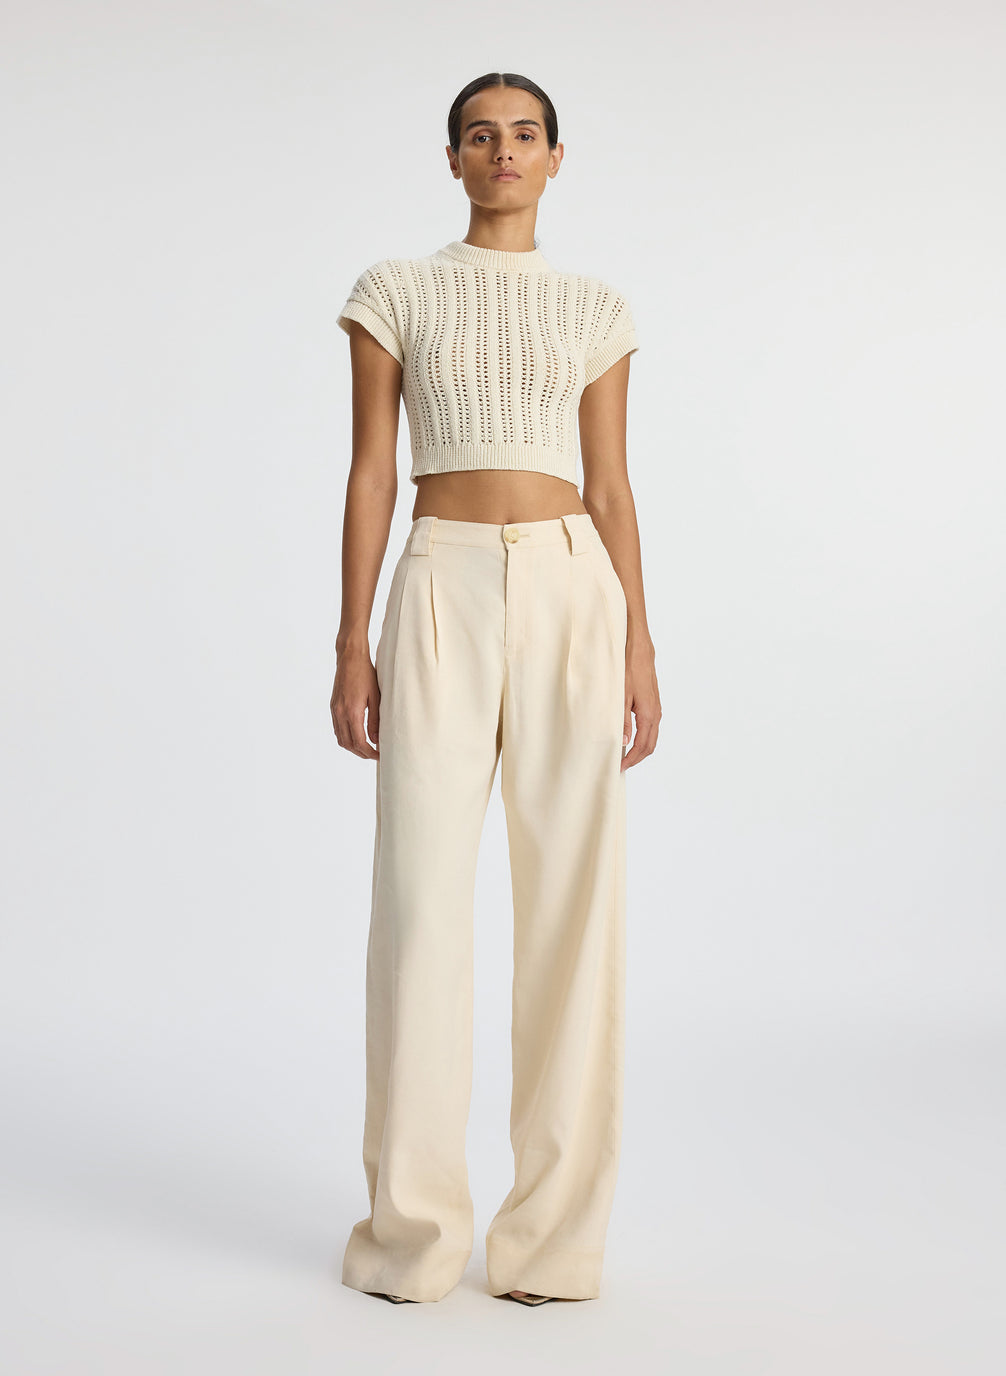 front view of woman wearing ivory short sleeve open weave top and beige wide leg pants